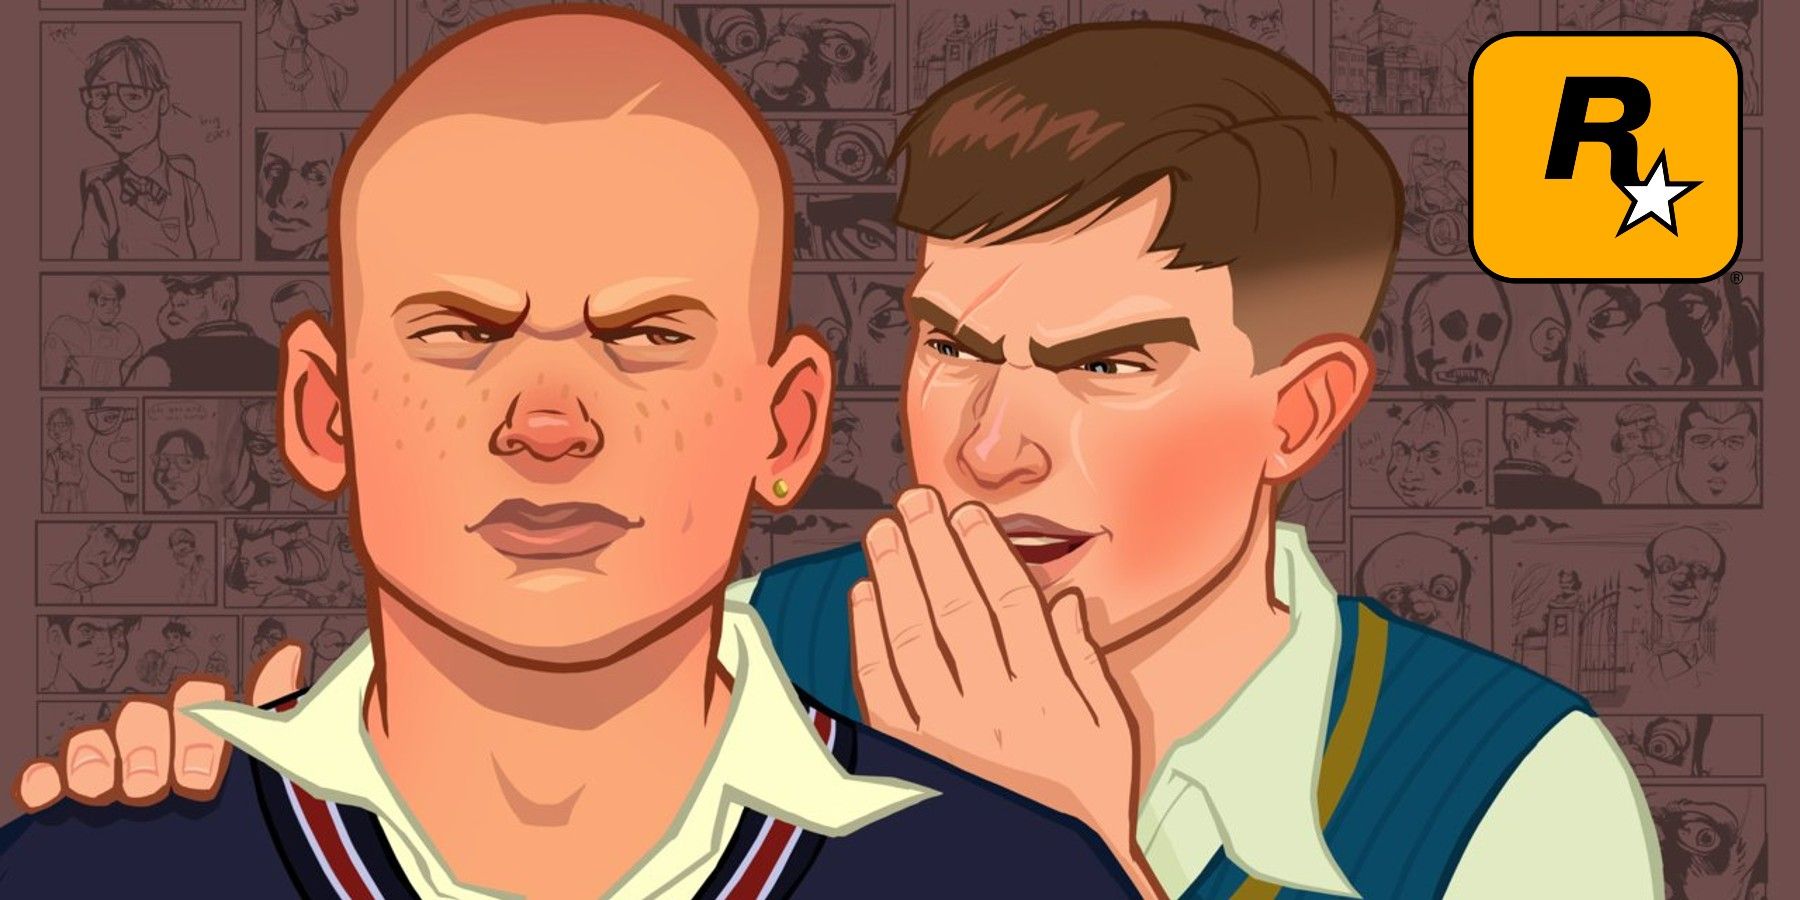 We Really Want These Bully 2 Rumours to Be True